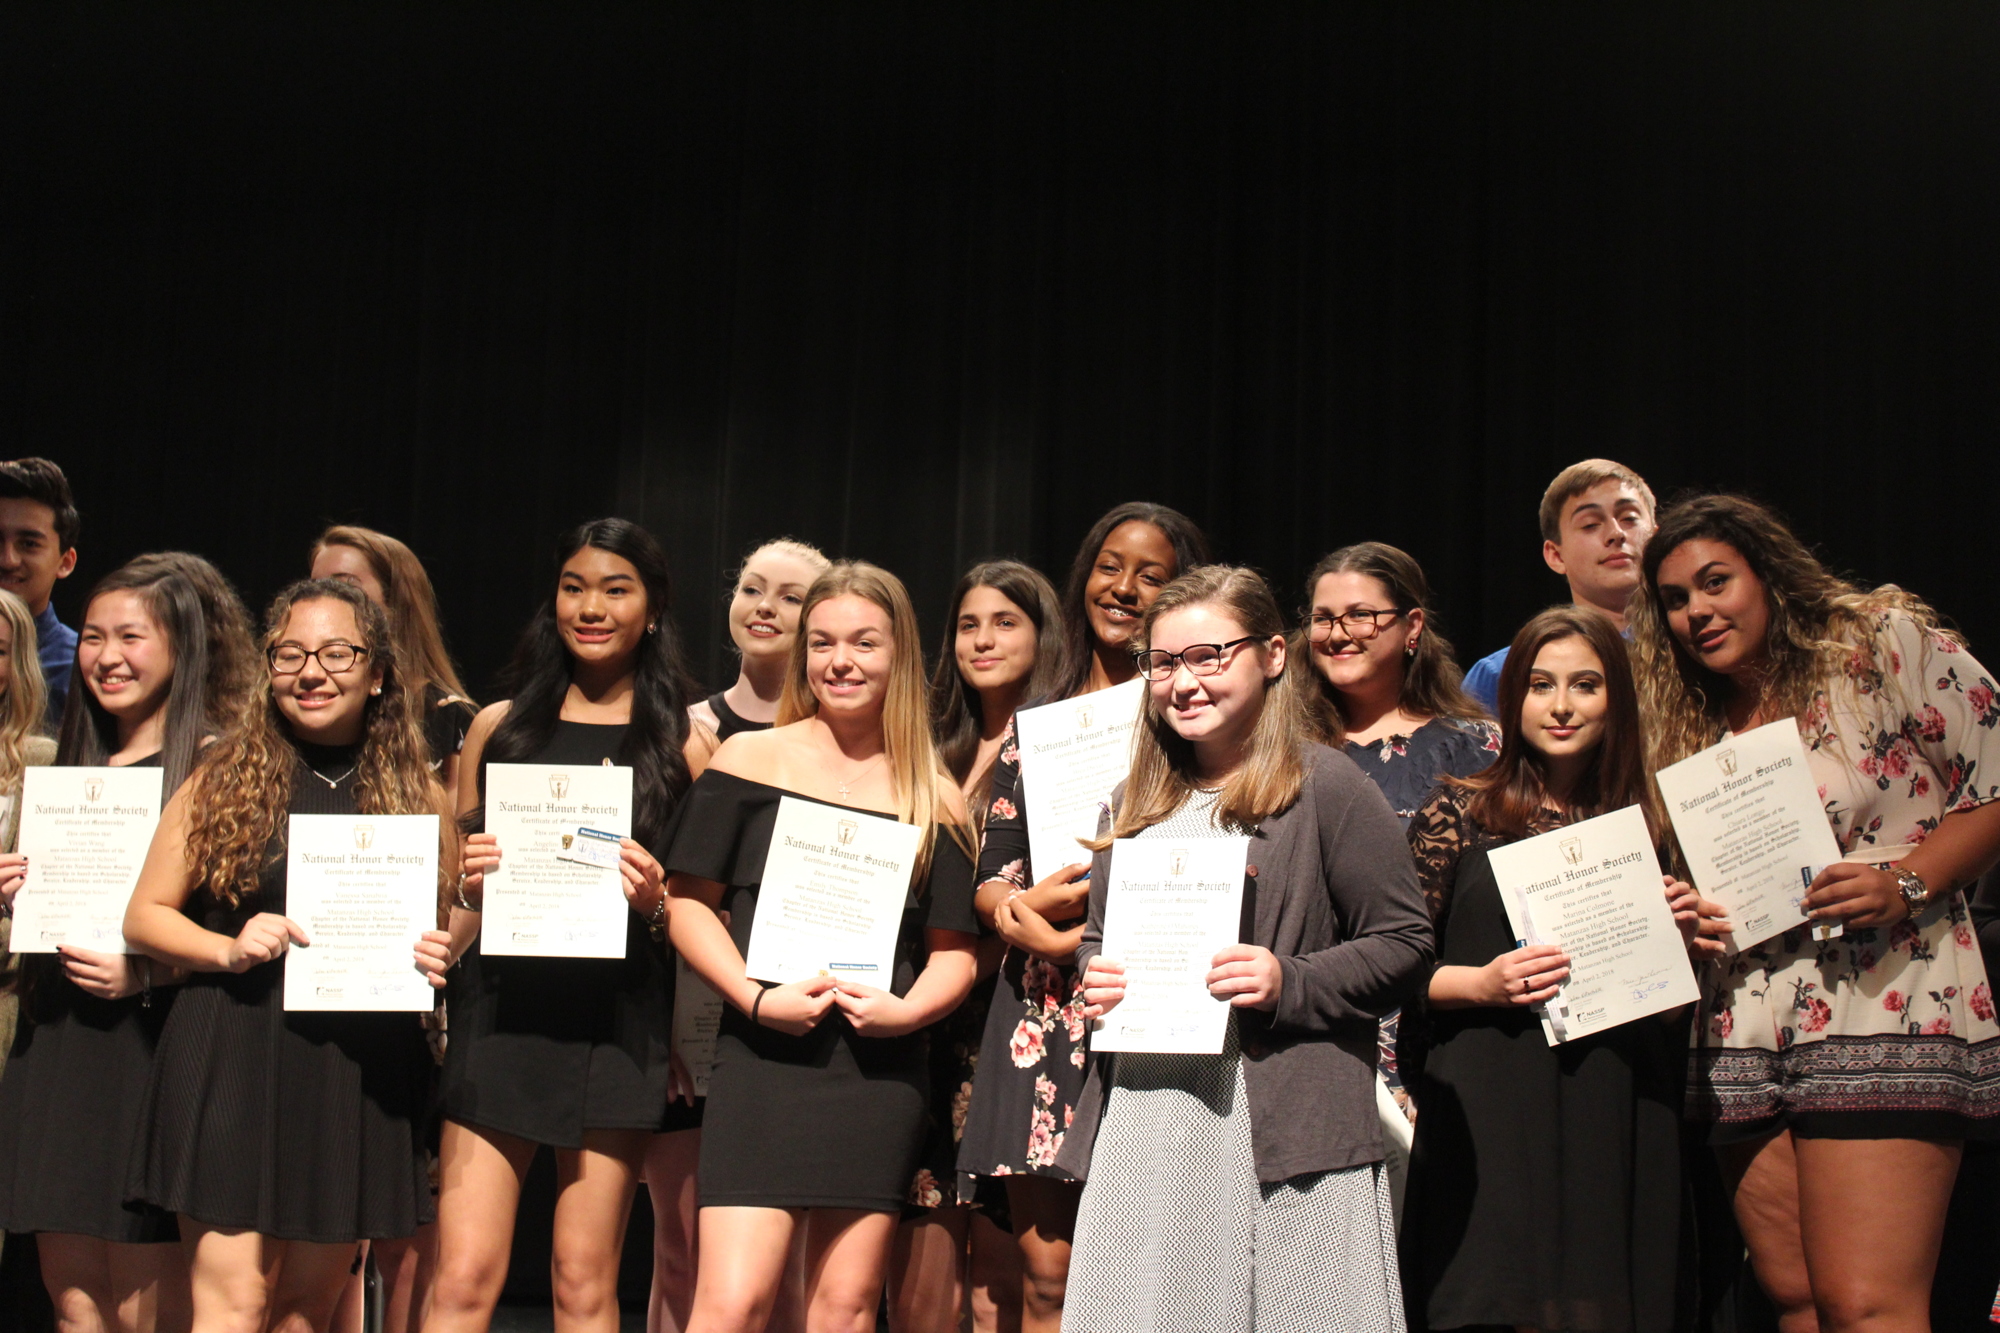 Matanzas High School welcomed the next wave of students into the National Honor Society on April 2. Photo courtesy of Jan Lemus